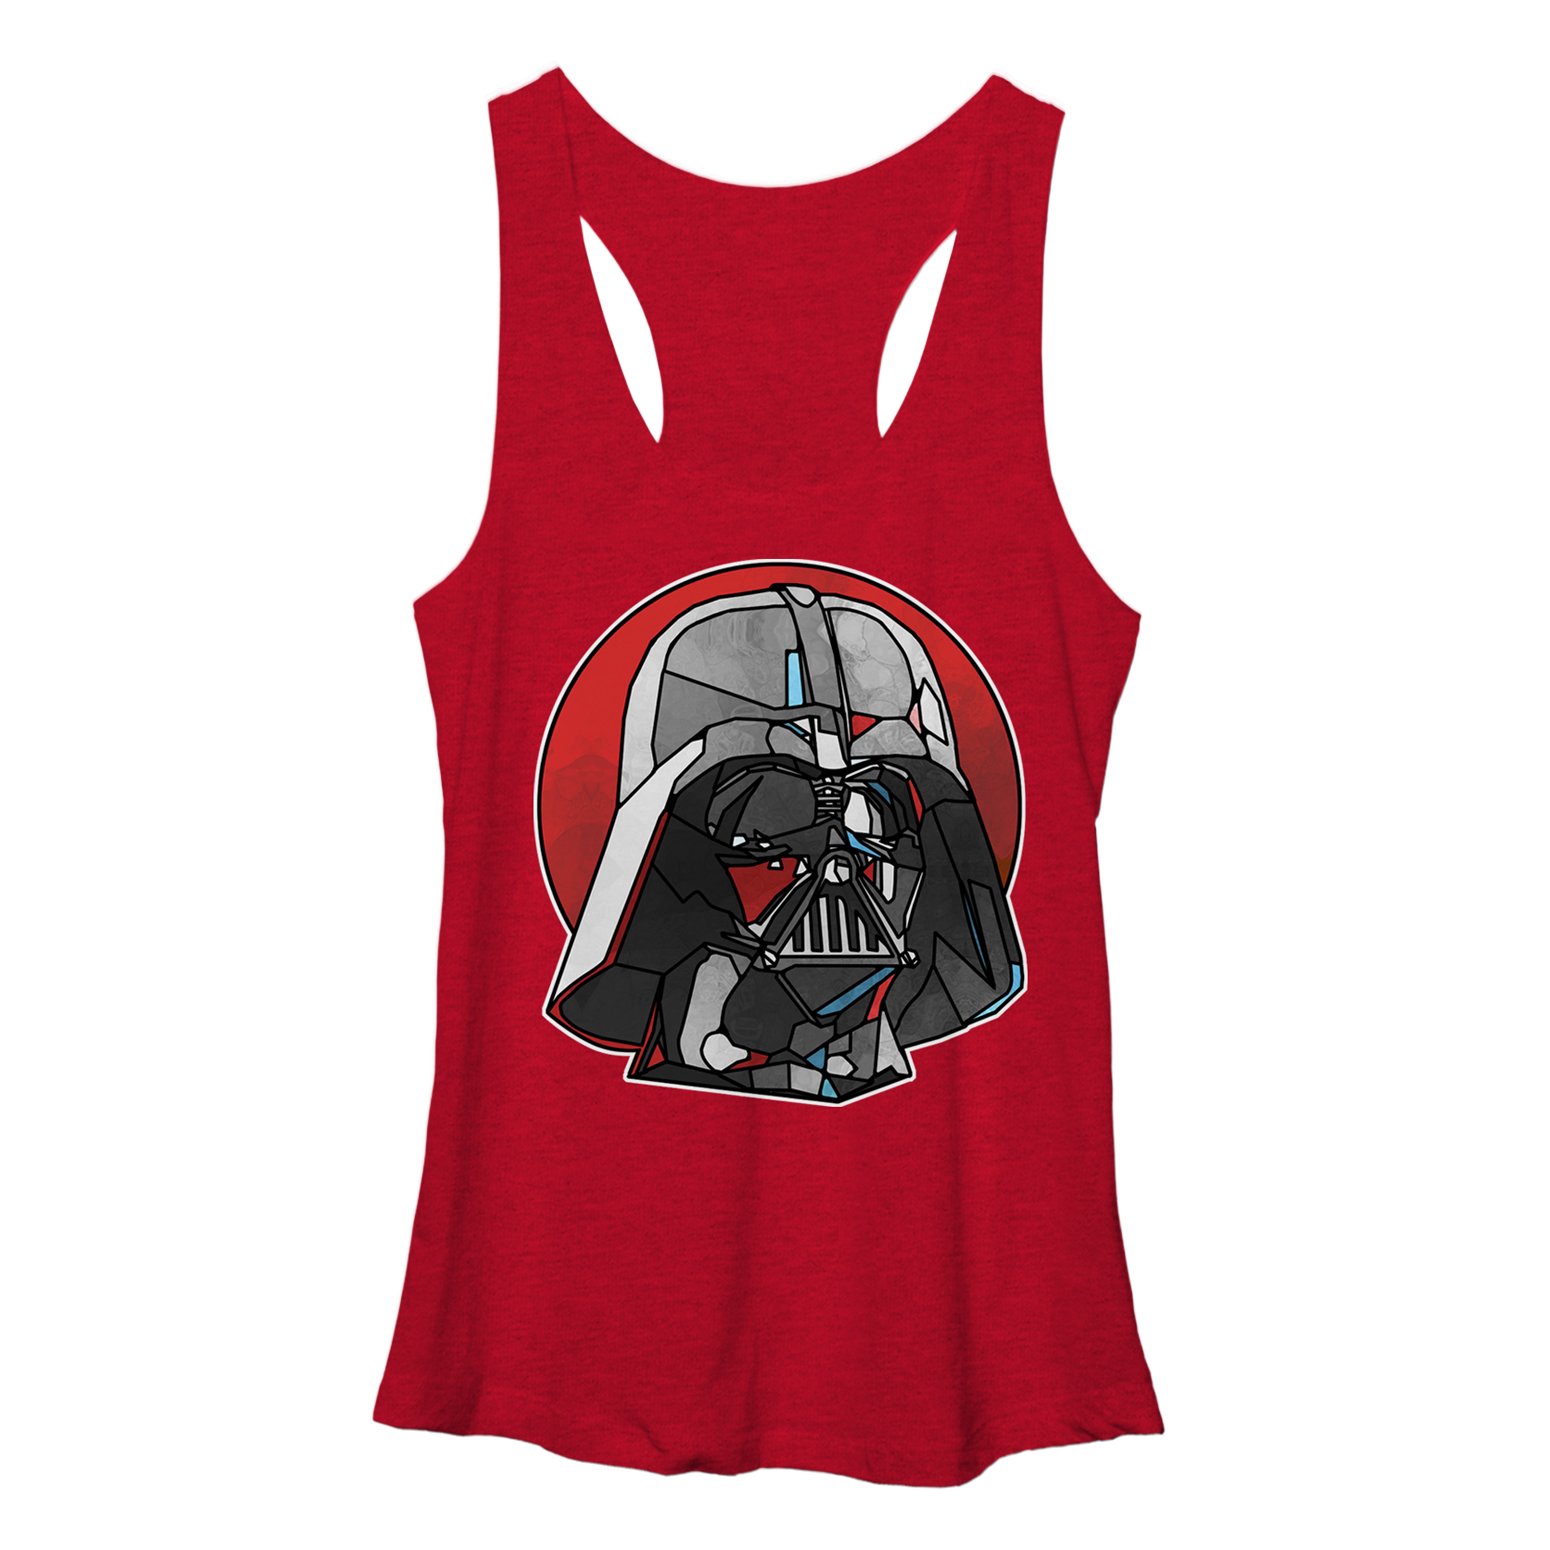 Star Wars Junior's Stained Vader Graphic T-Shirt